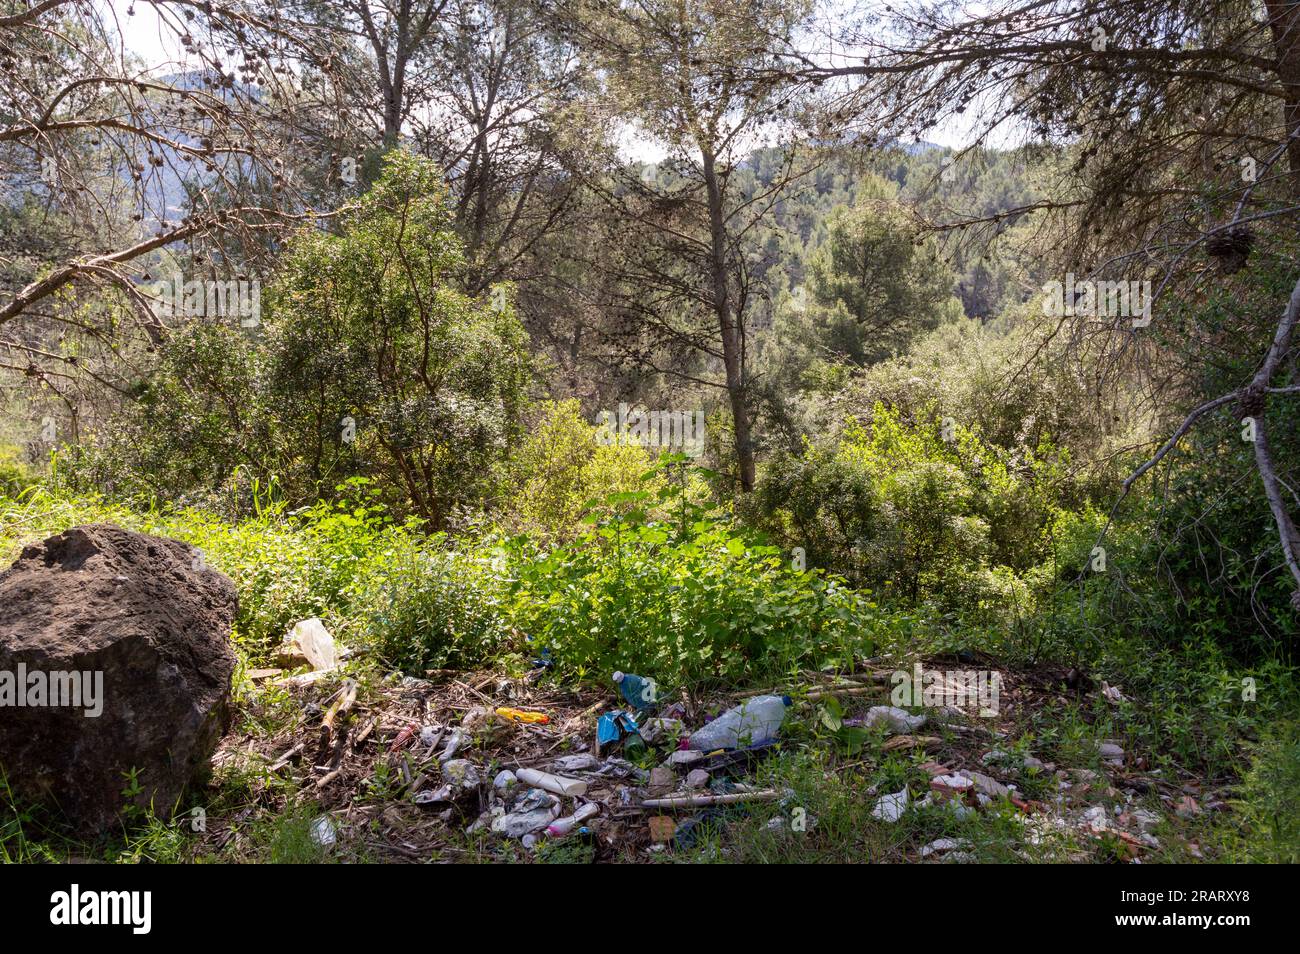 garbage in nature, destruction of the environment, conceptual photography Stock Photo